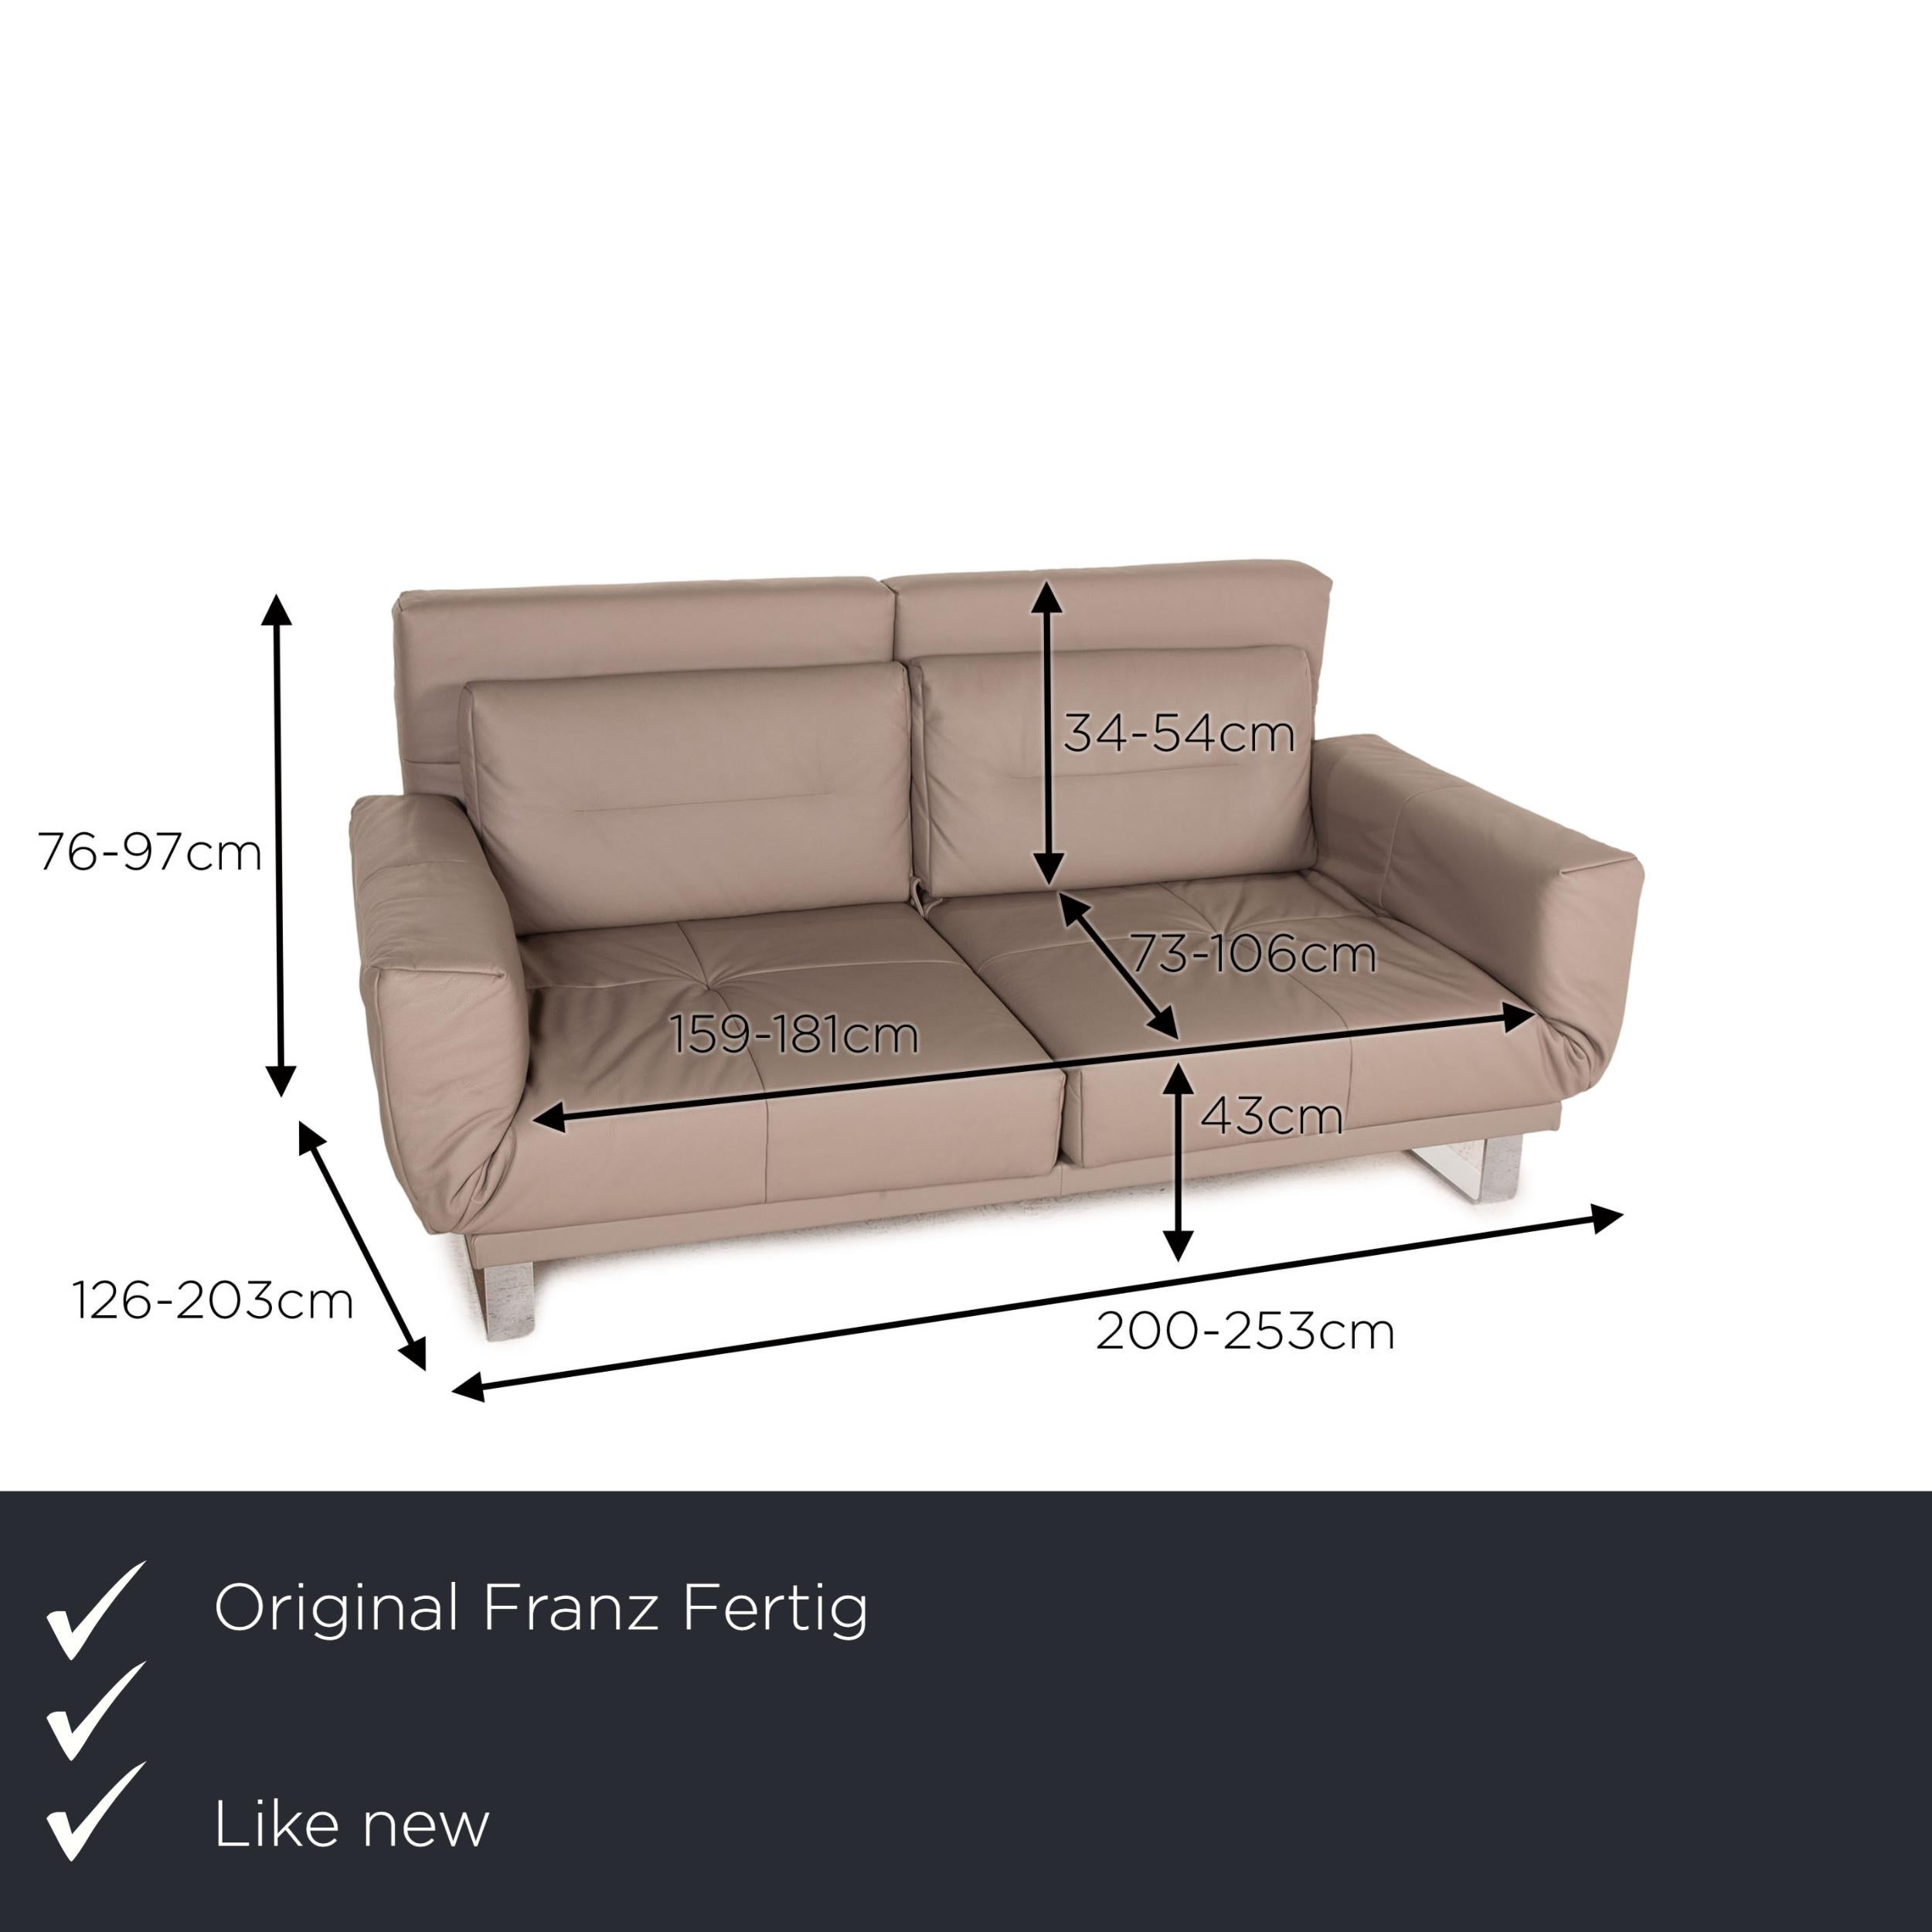 We present to you a Franz Fertig Letto leather sofa beige two-seater function sleeping function.
 SKU: #16931-c5
 

 Product measurements in centimeters:
 

 depth: 126
 width: 200
 height: 76
 seat height: 43
 rest height: 50
 seat